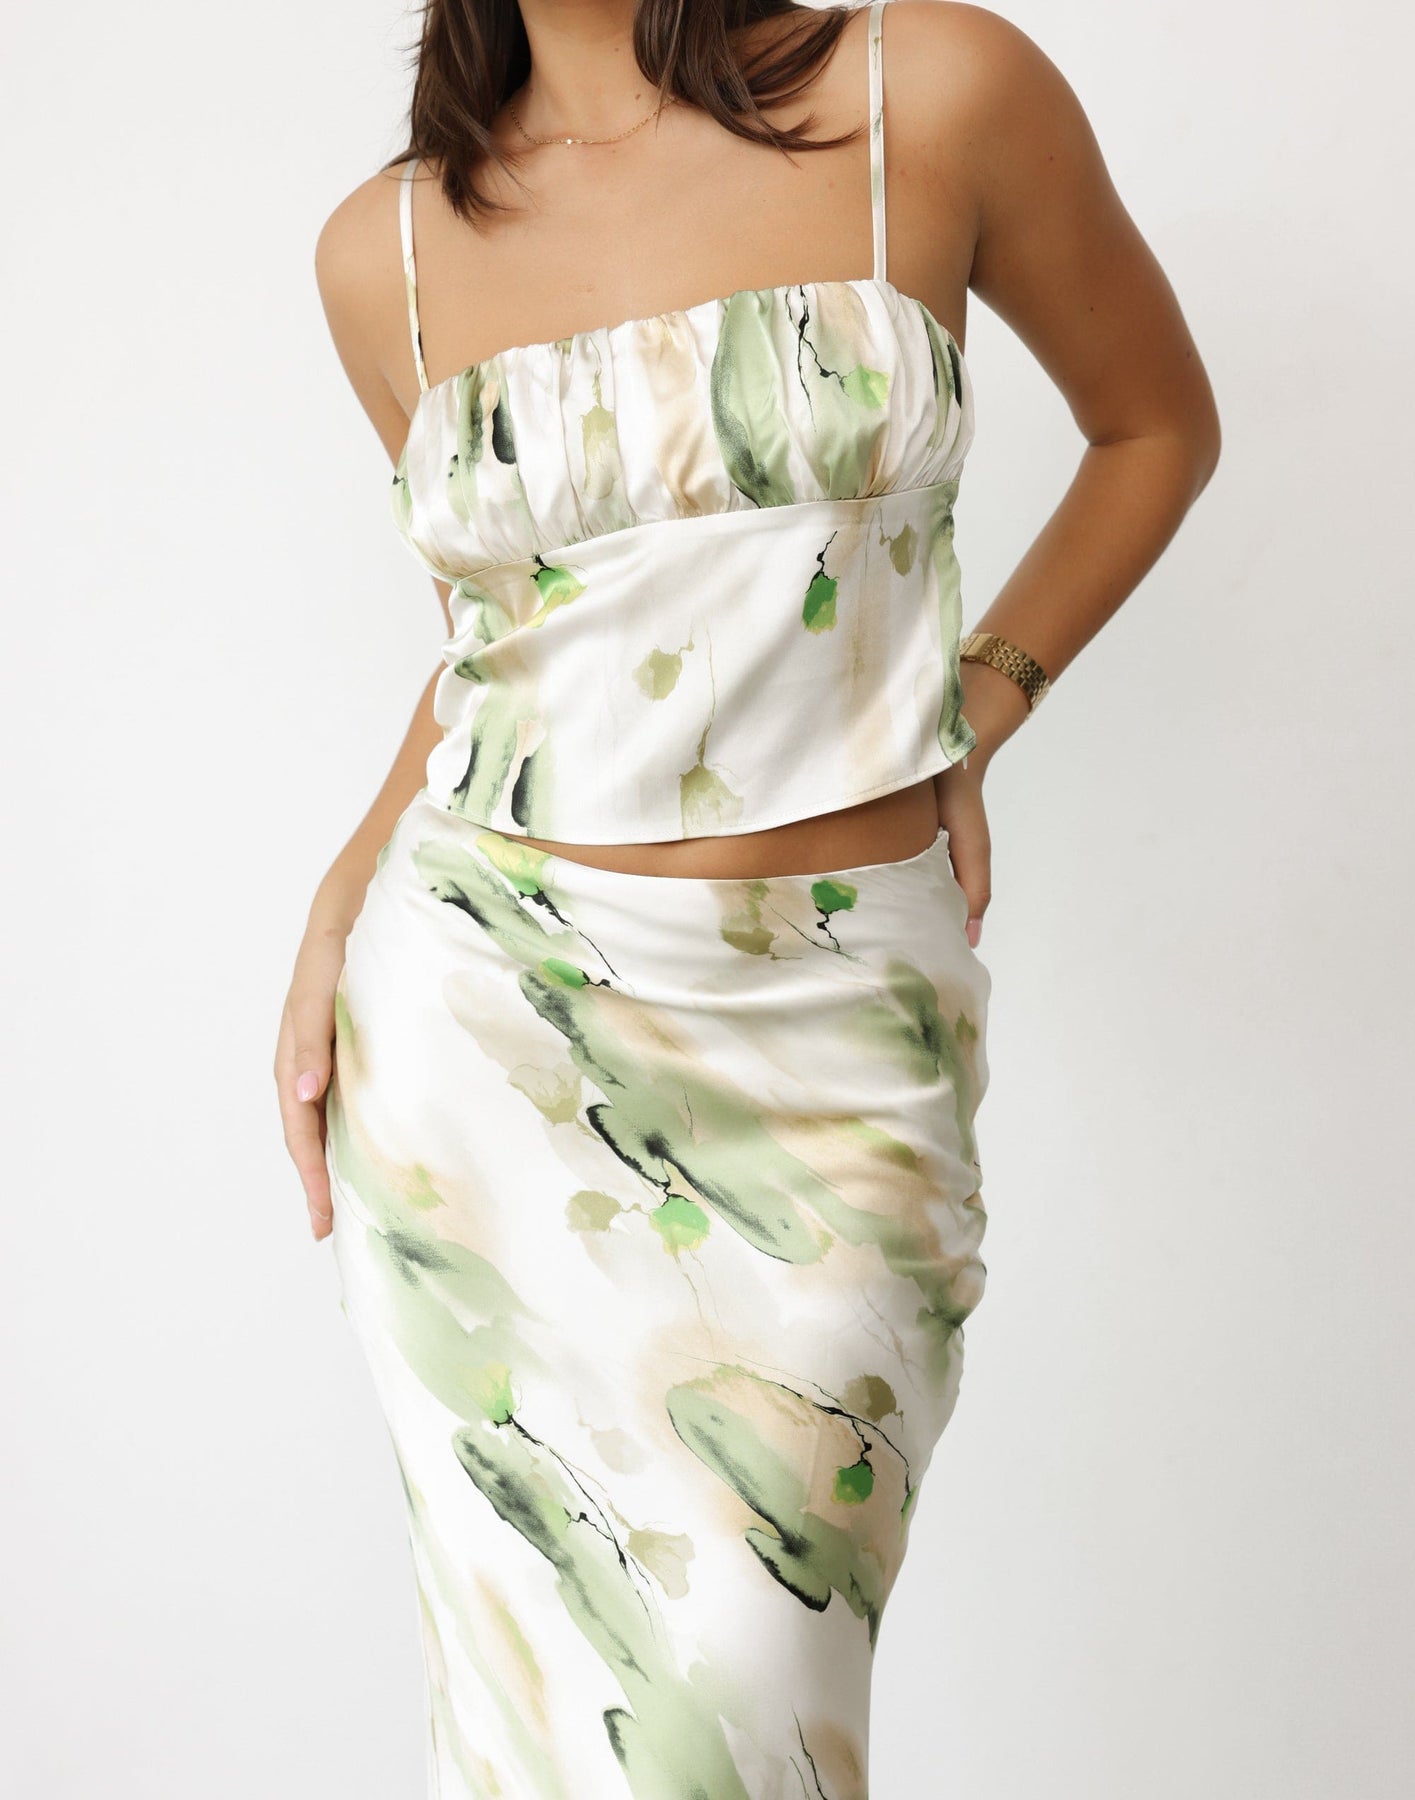 Collective Tops - Adoette Cami Top (Water Lily)
                Add to wishlist fifth image